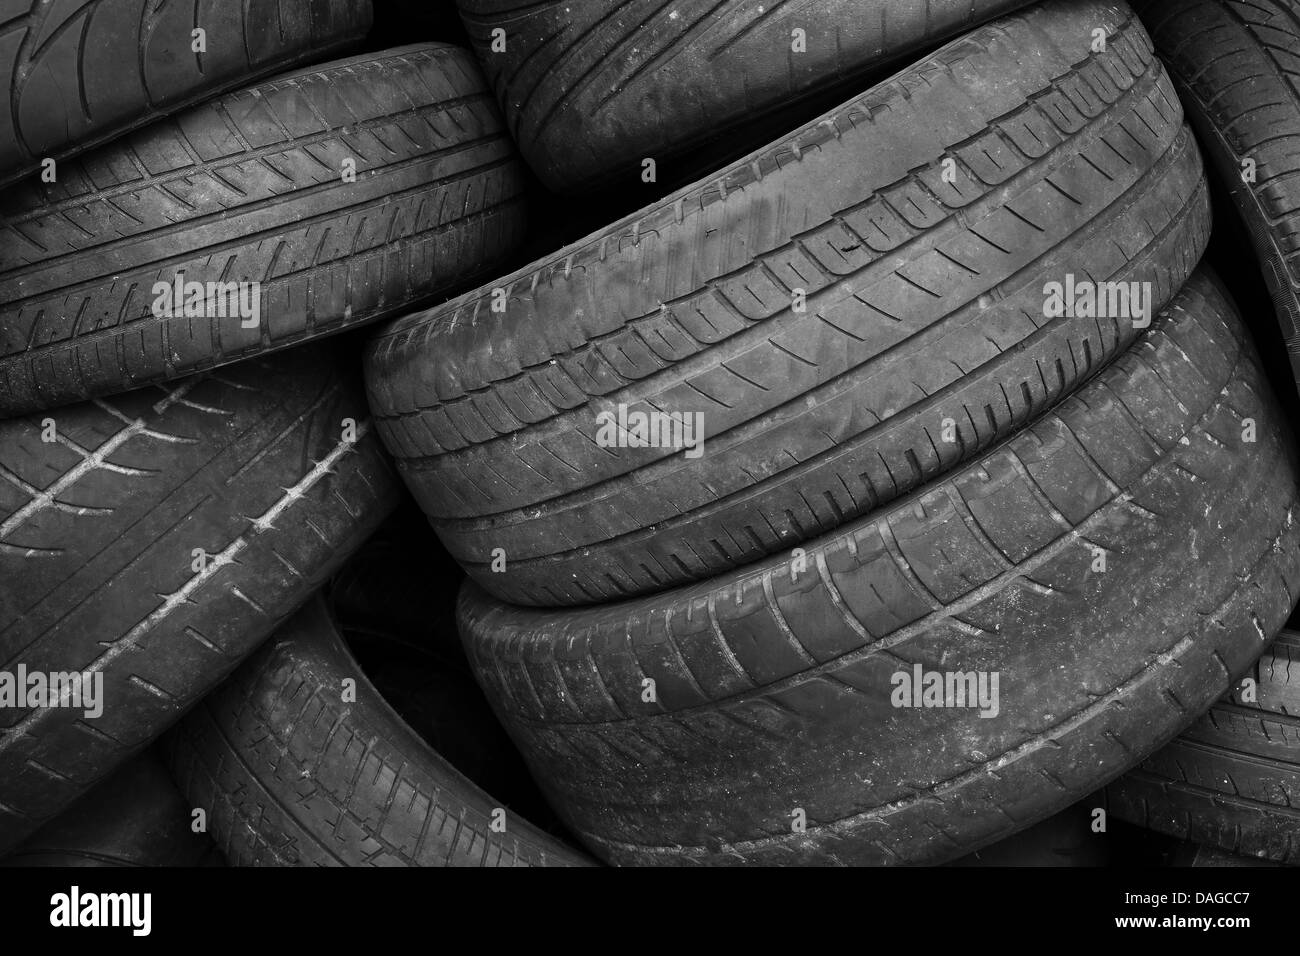 Pile of old worn out tires in black and white Stock Photo